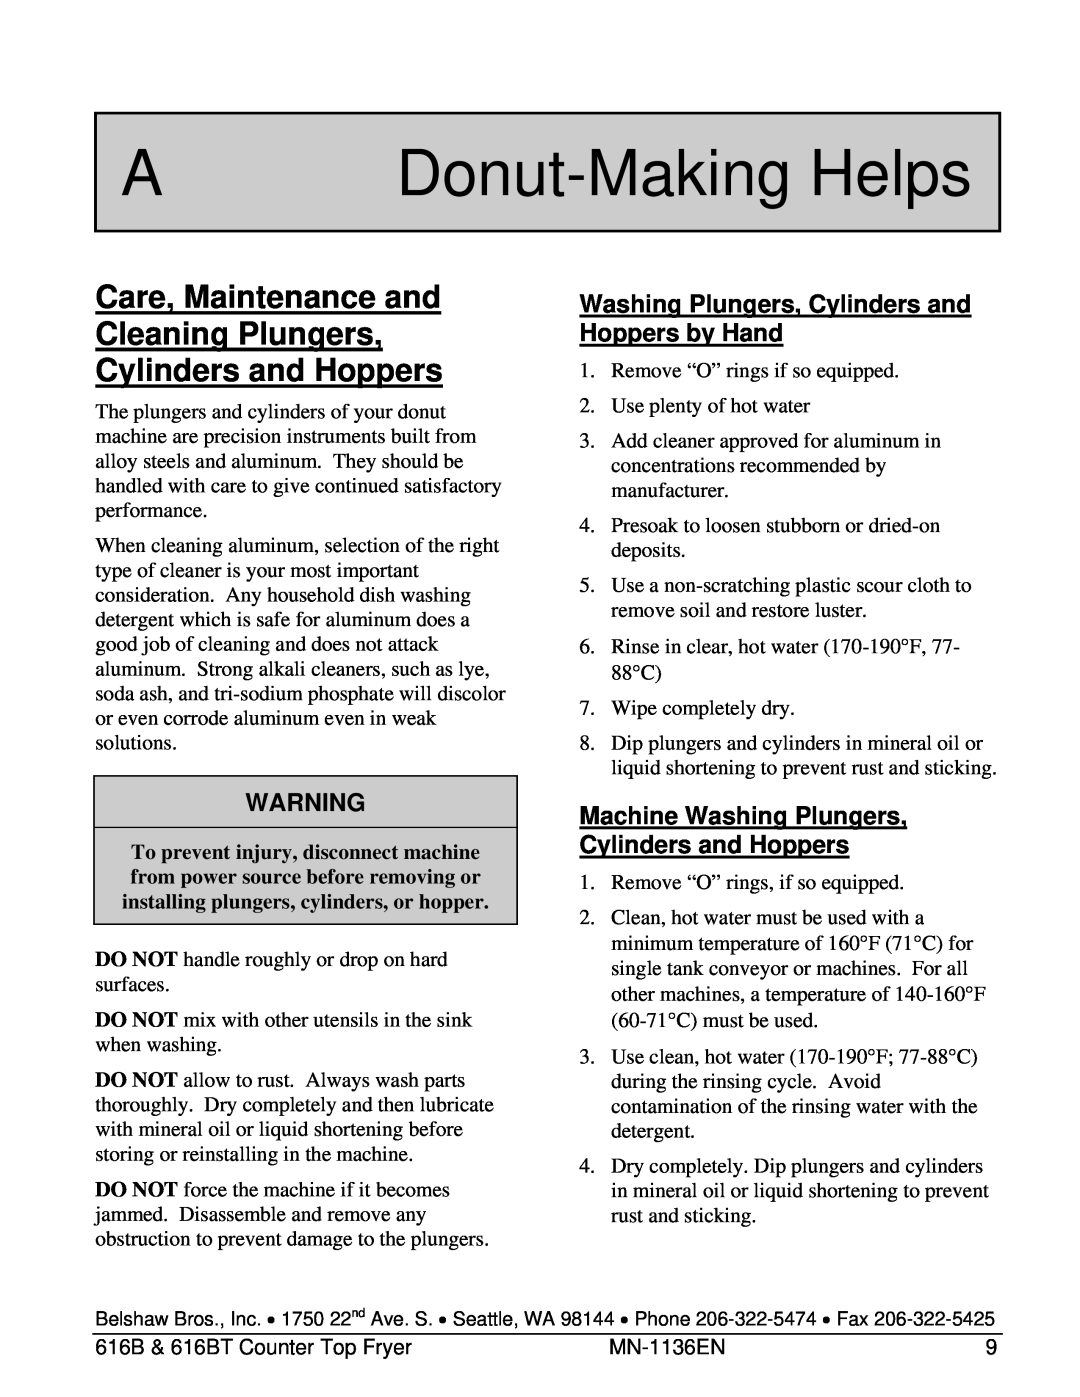 Belshaw Brothers 616BT manual A Donut-Making Helps, Care, Maintenance and Cleaning Plungers Cylinders and Hoppers 